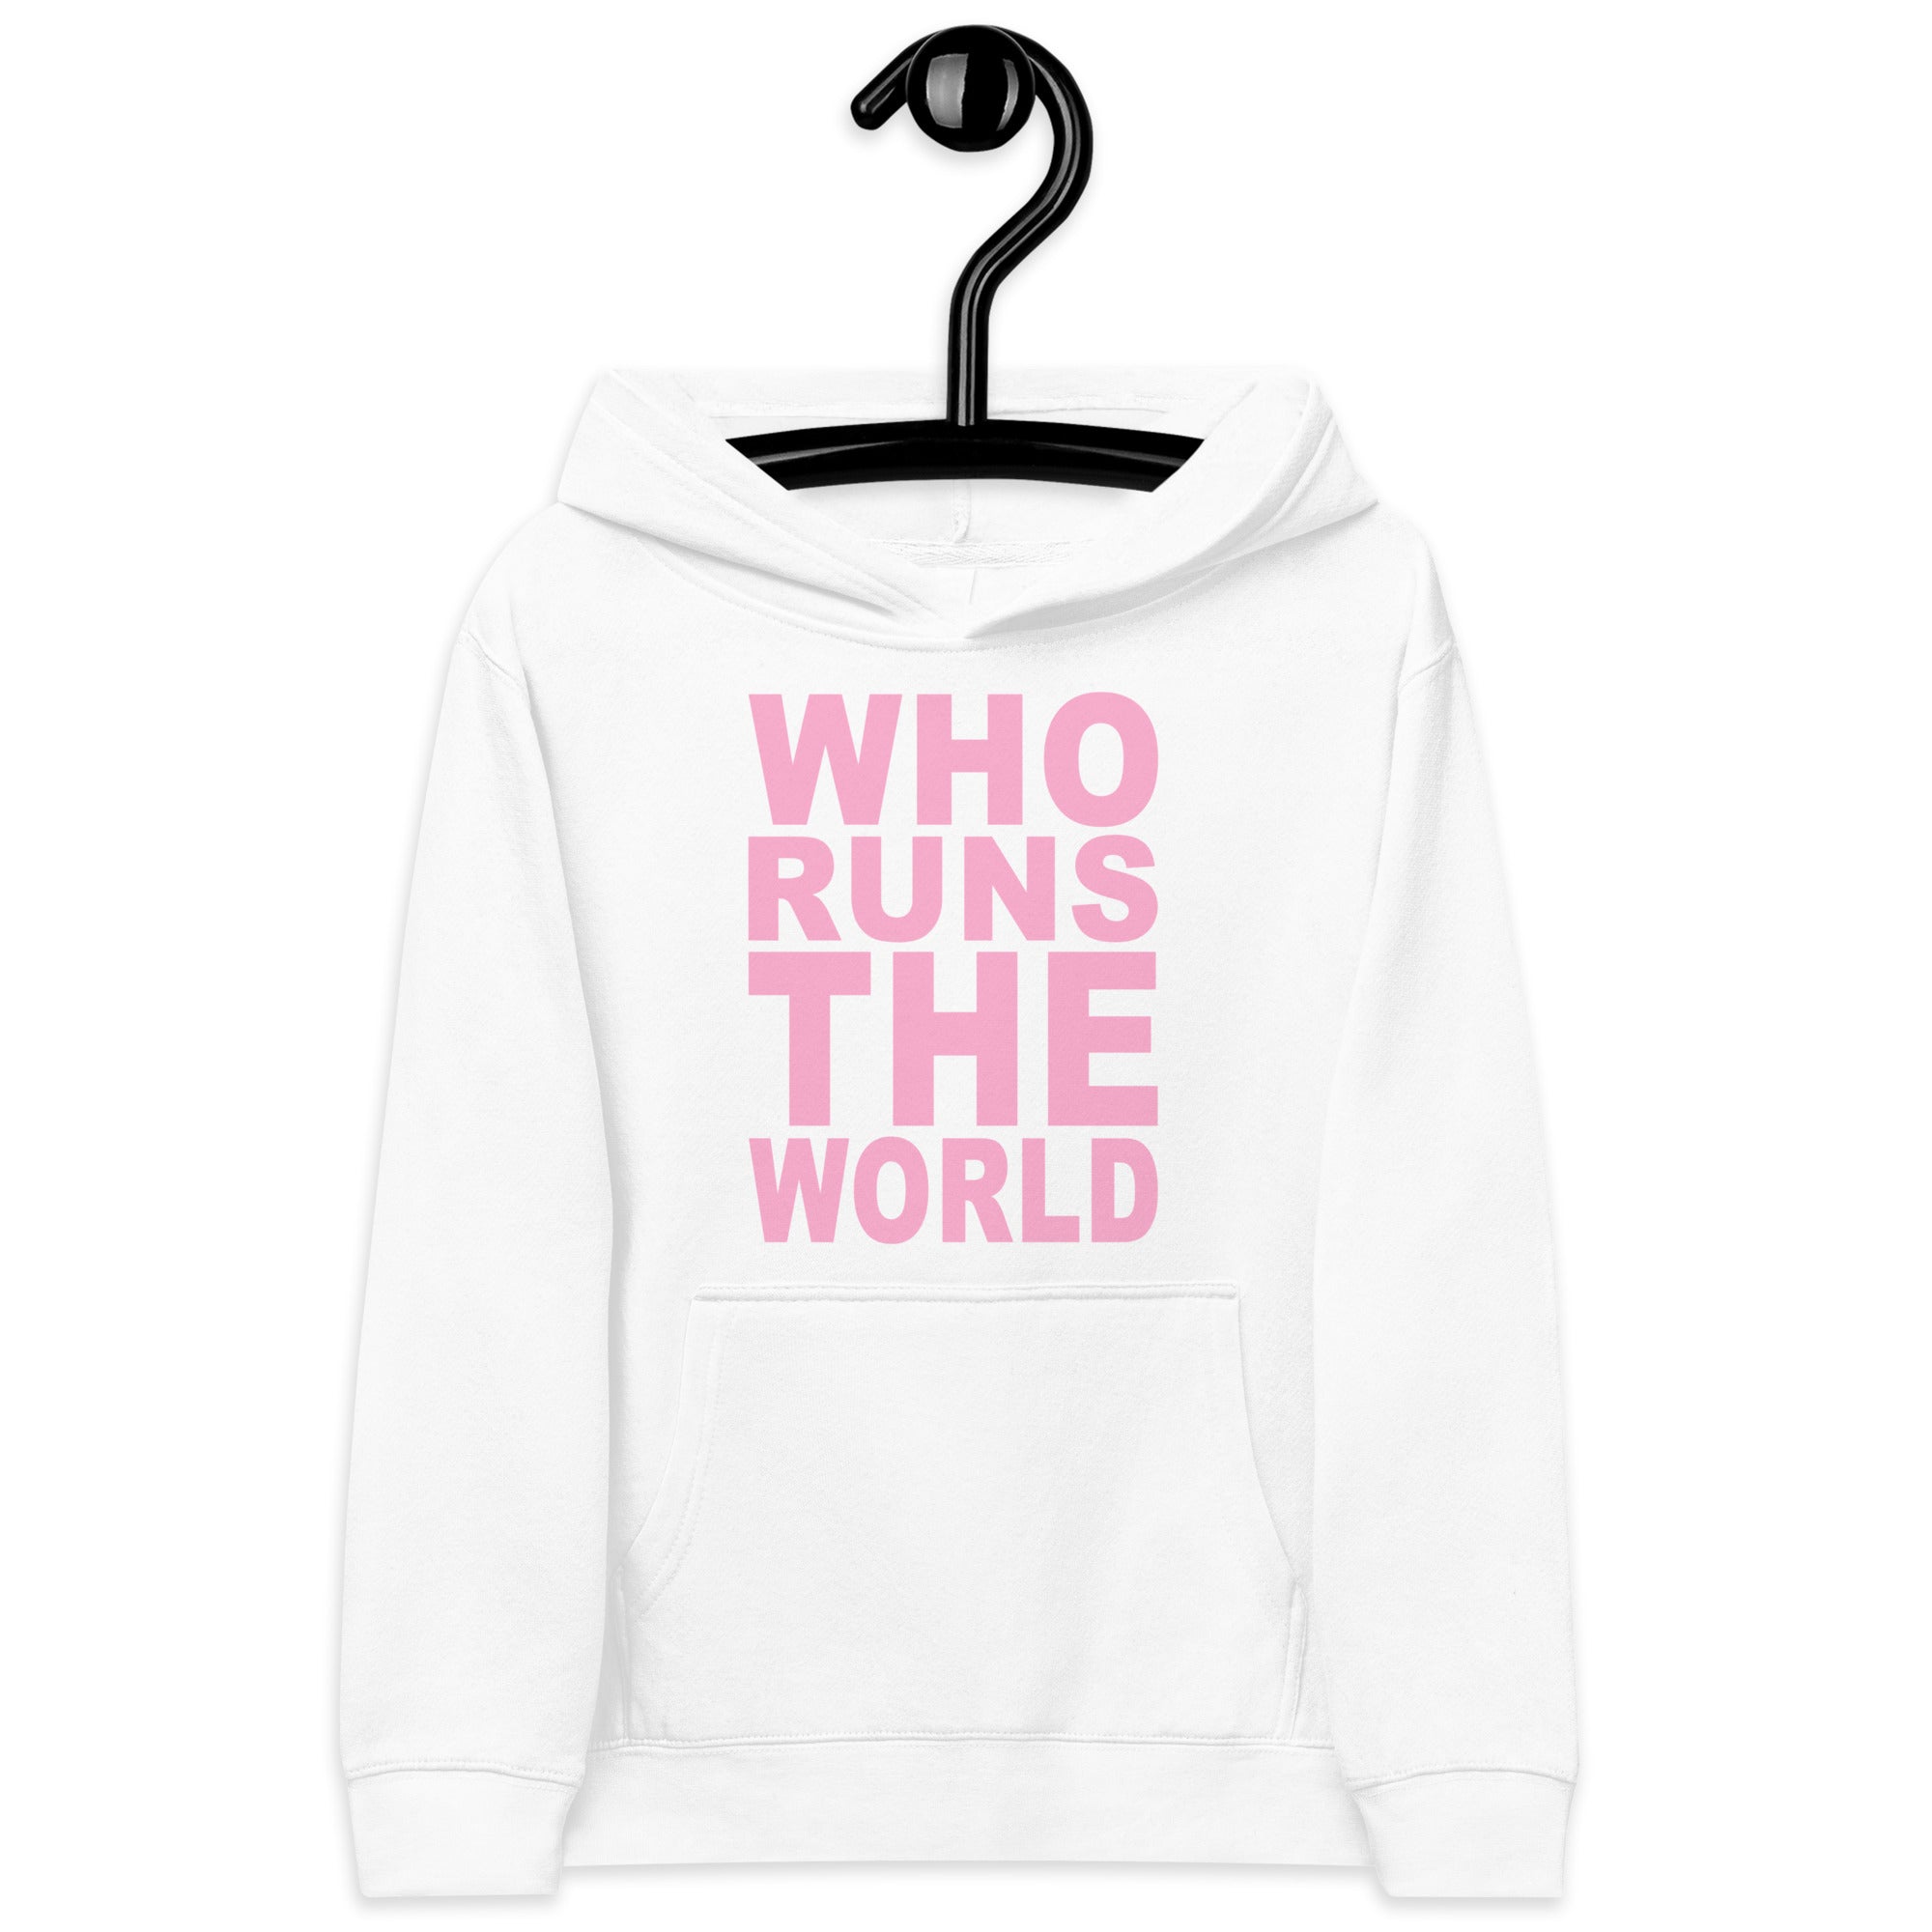 EVERYDAY GIRLSTRONG HOODIE WHITE